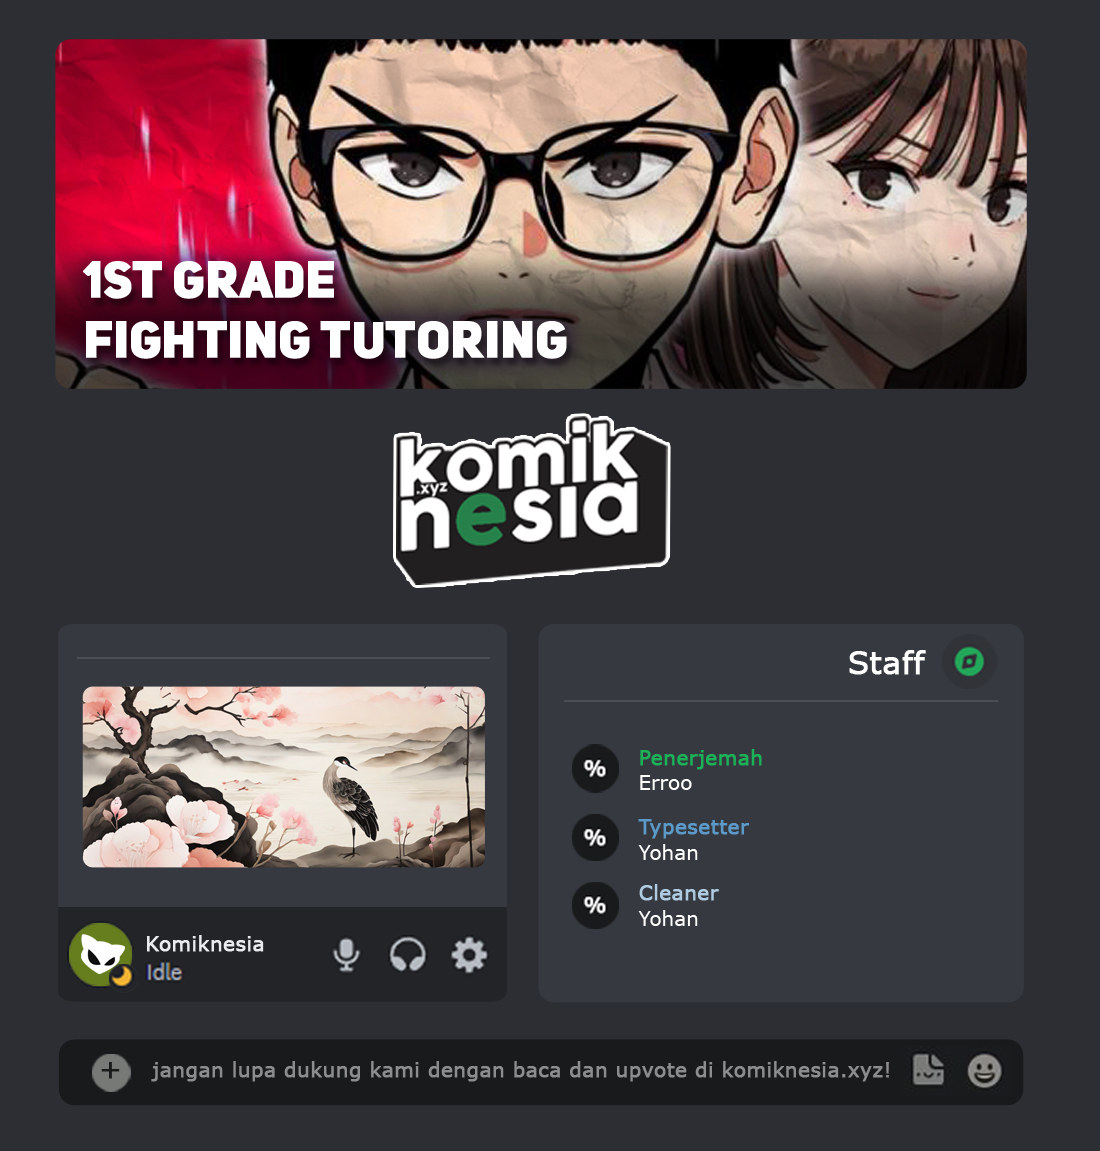 Top 1 Fighting Tutoring Chapter 17